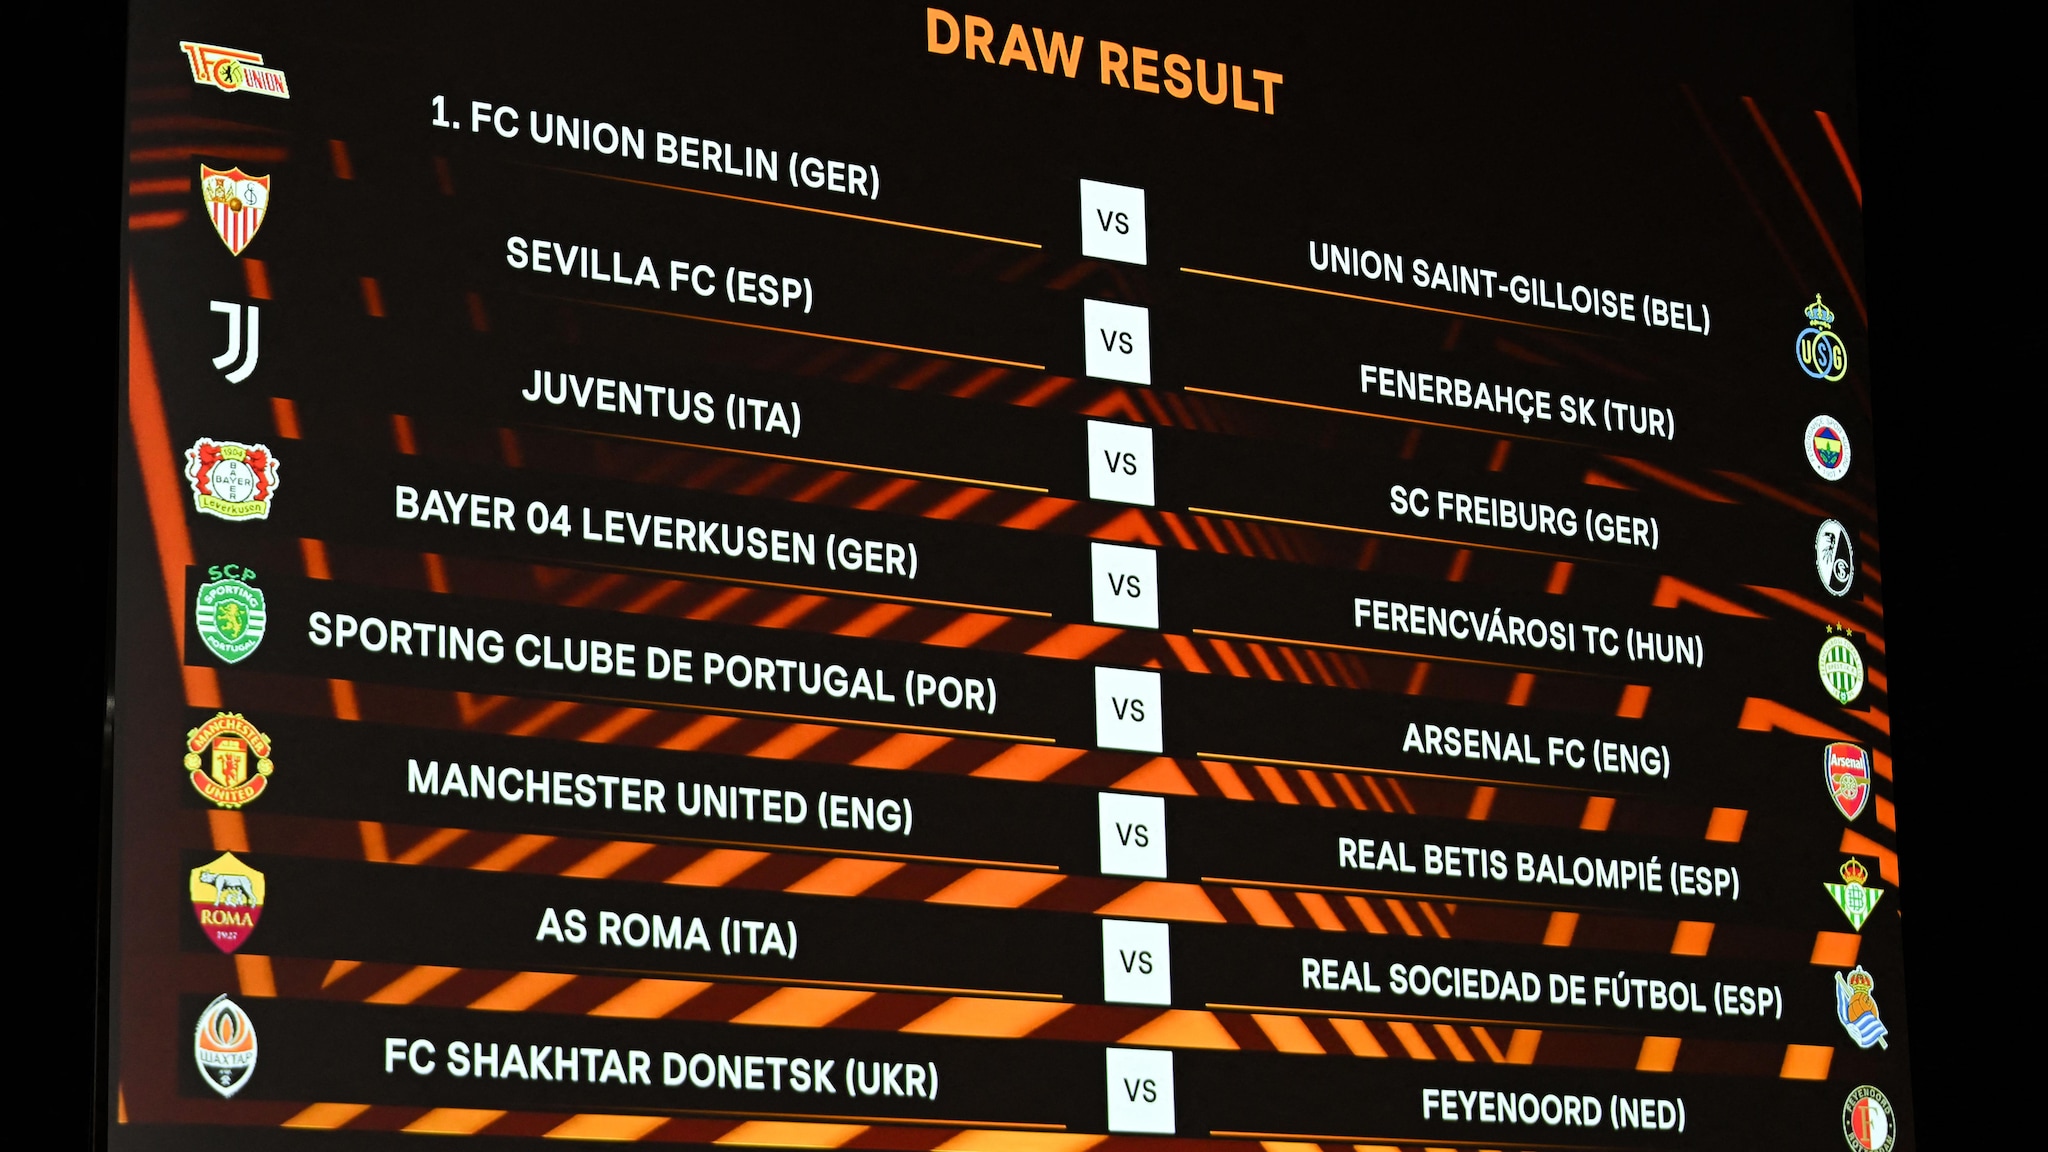 UEFA Europa League round of 16 draw Man United vs Betis, Sporting CP